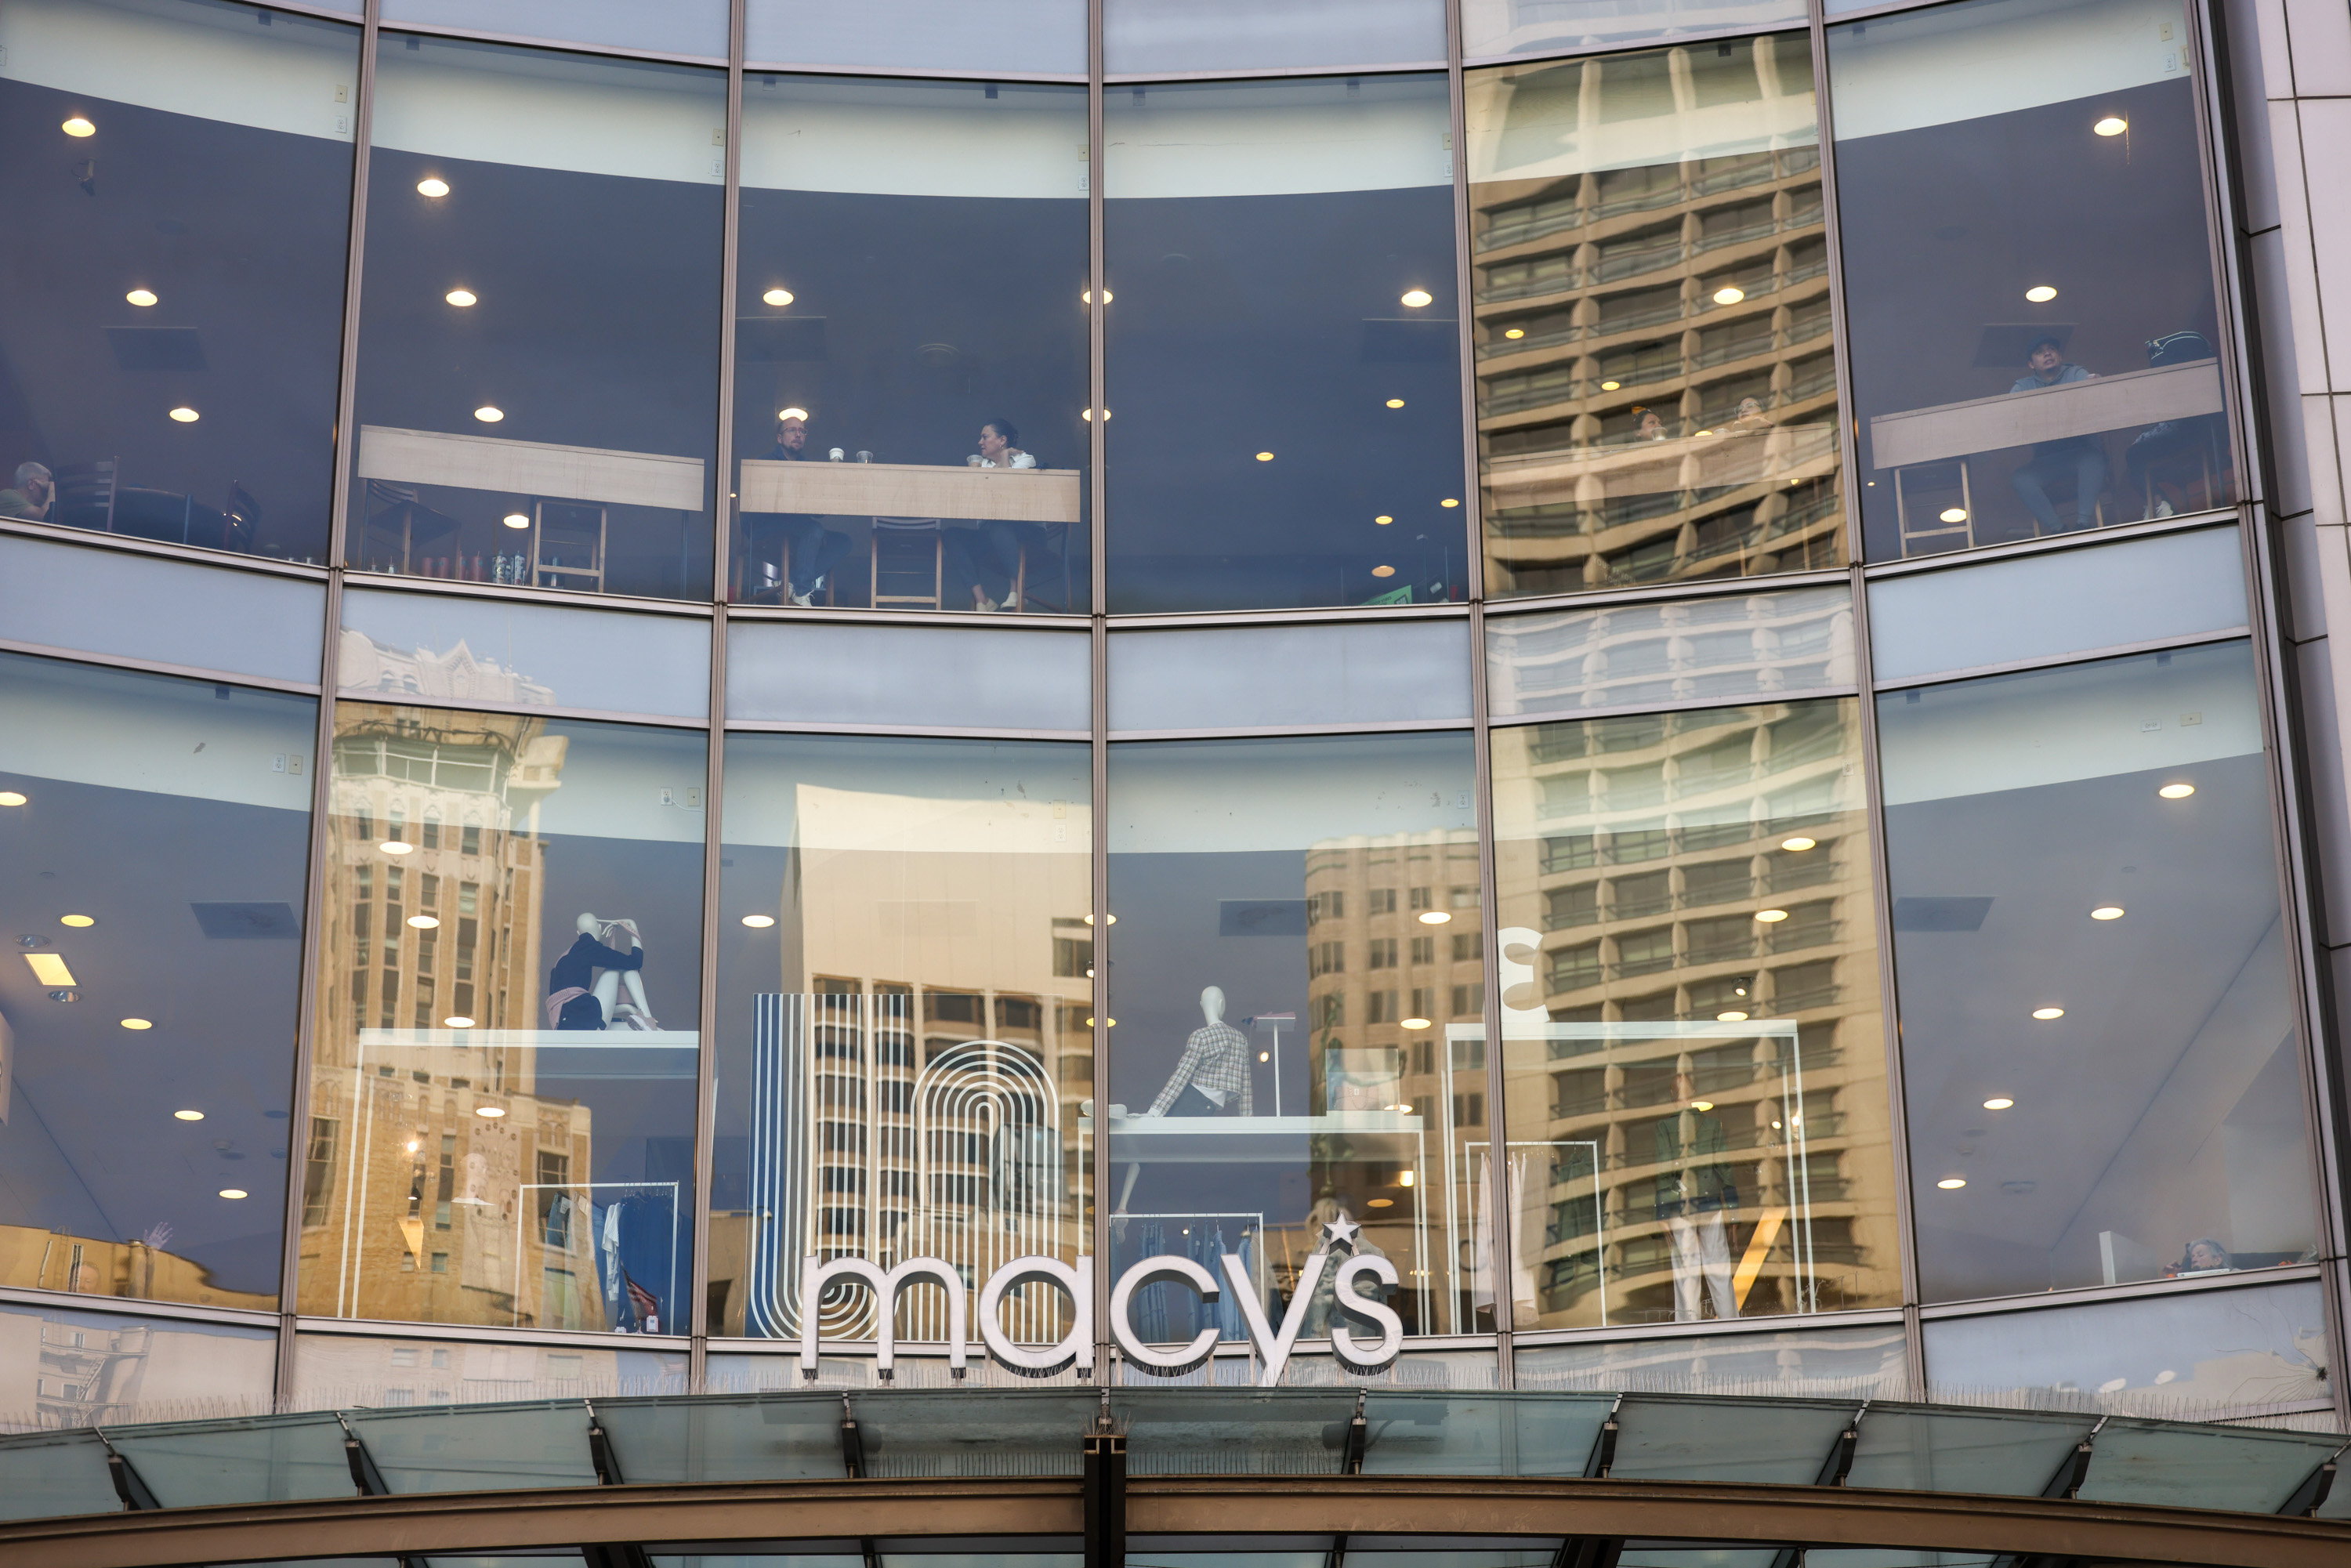 The image shows Macy's store windows reflecting buildings, with people visible inside.